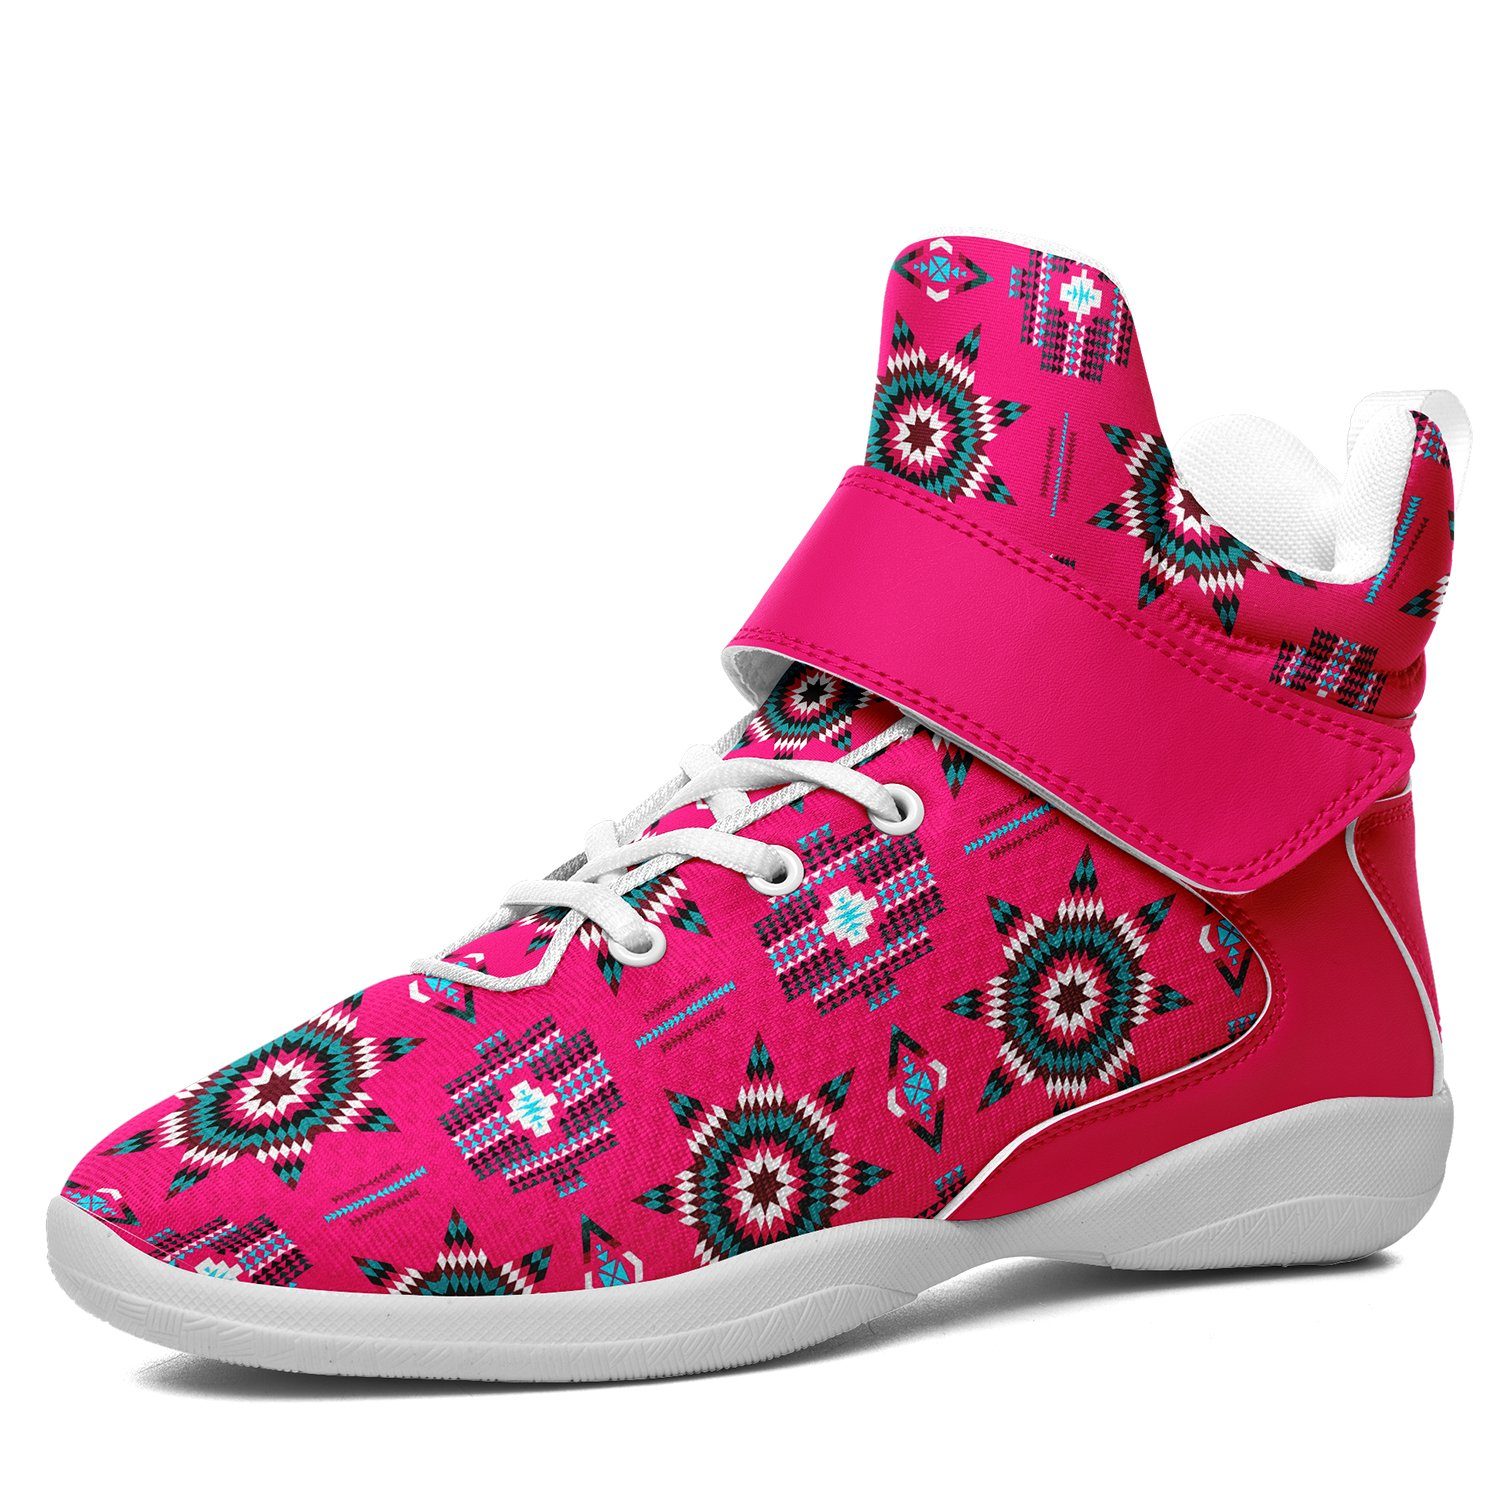 Rising Star Strawberry Moon Ipottaa Basketball / Sport High Top Shoes 49 Dzine US Women 4.5 / US Youth 3.5 / EUR 35 White Sole with Pink Strap 